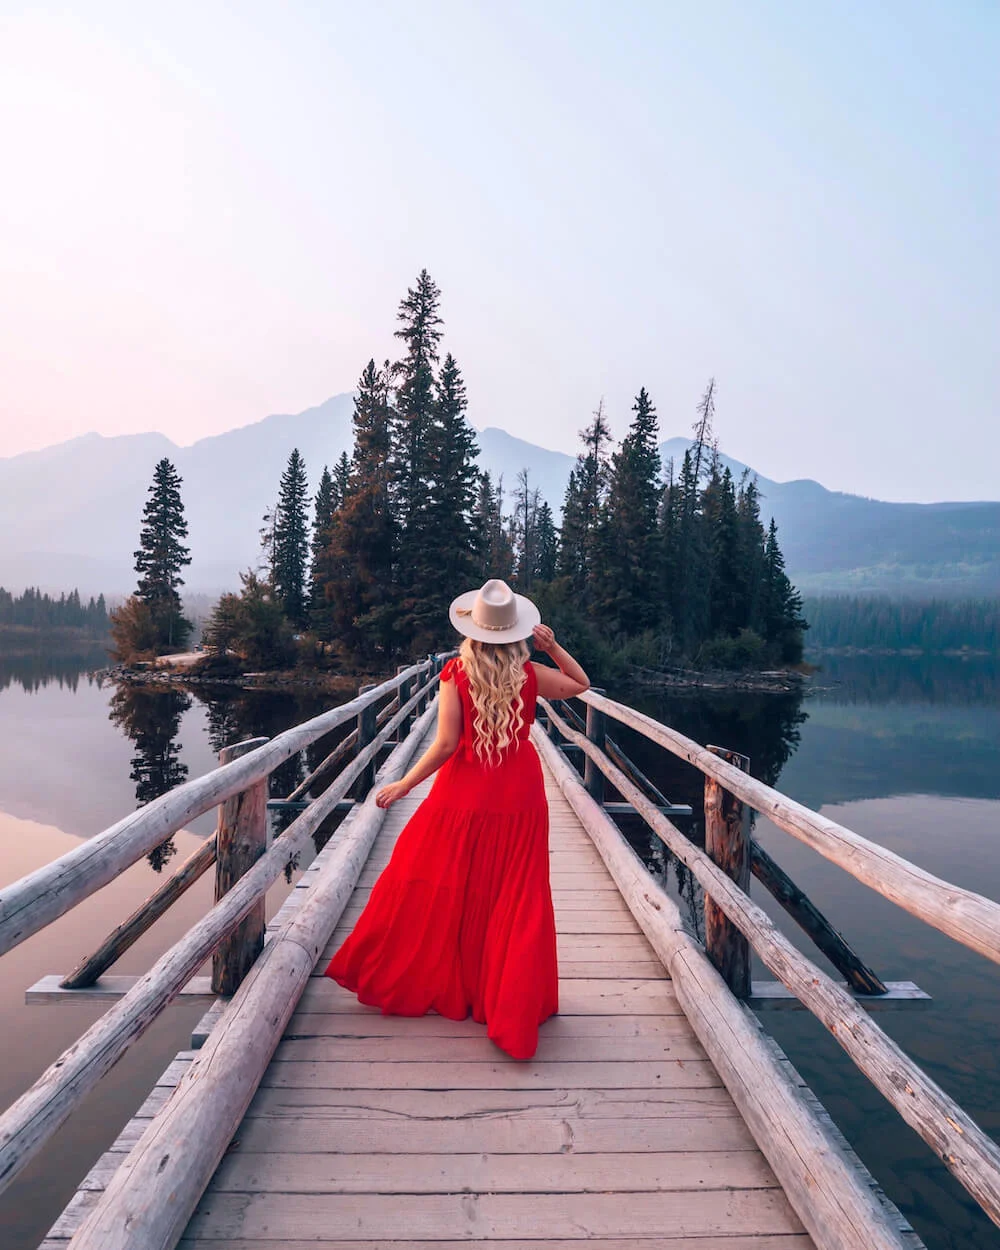 Planning a trip to Jasper National Park soon? Here's a local's guide to some of the best things to do in Jasper. From hikes and trails to adventure sports, family friendly excursions, dining experiences and more. You won't want to miss this guide of the best things to do and places to see in Jasper. Pictured here: Pyramid Island